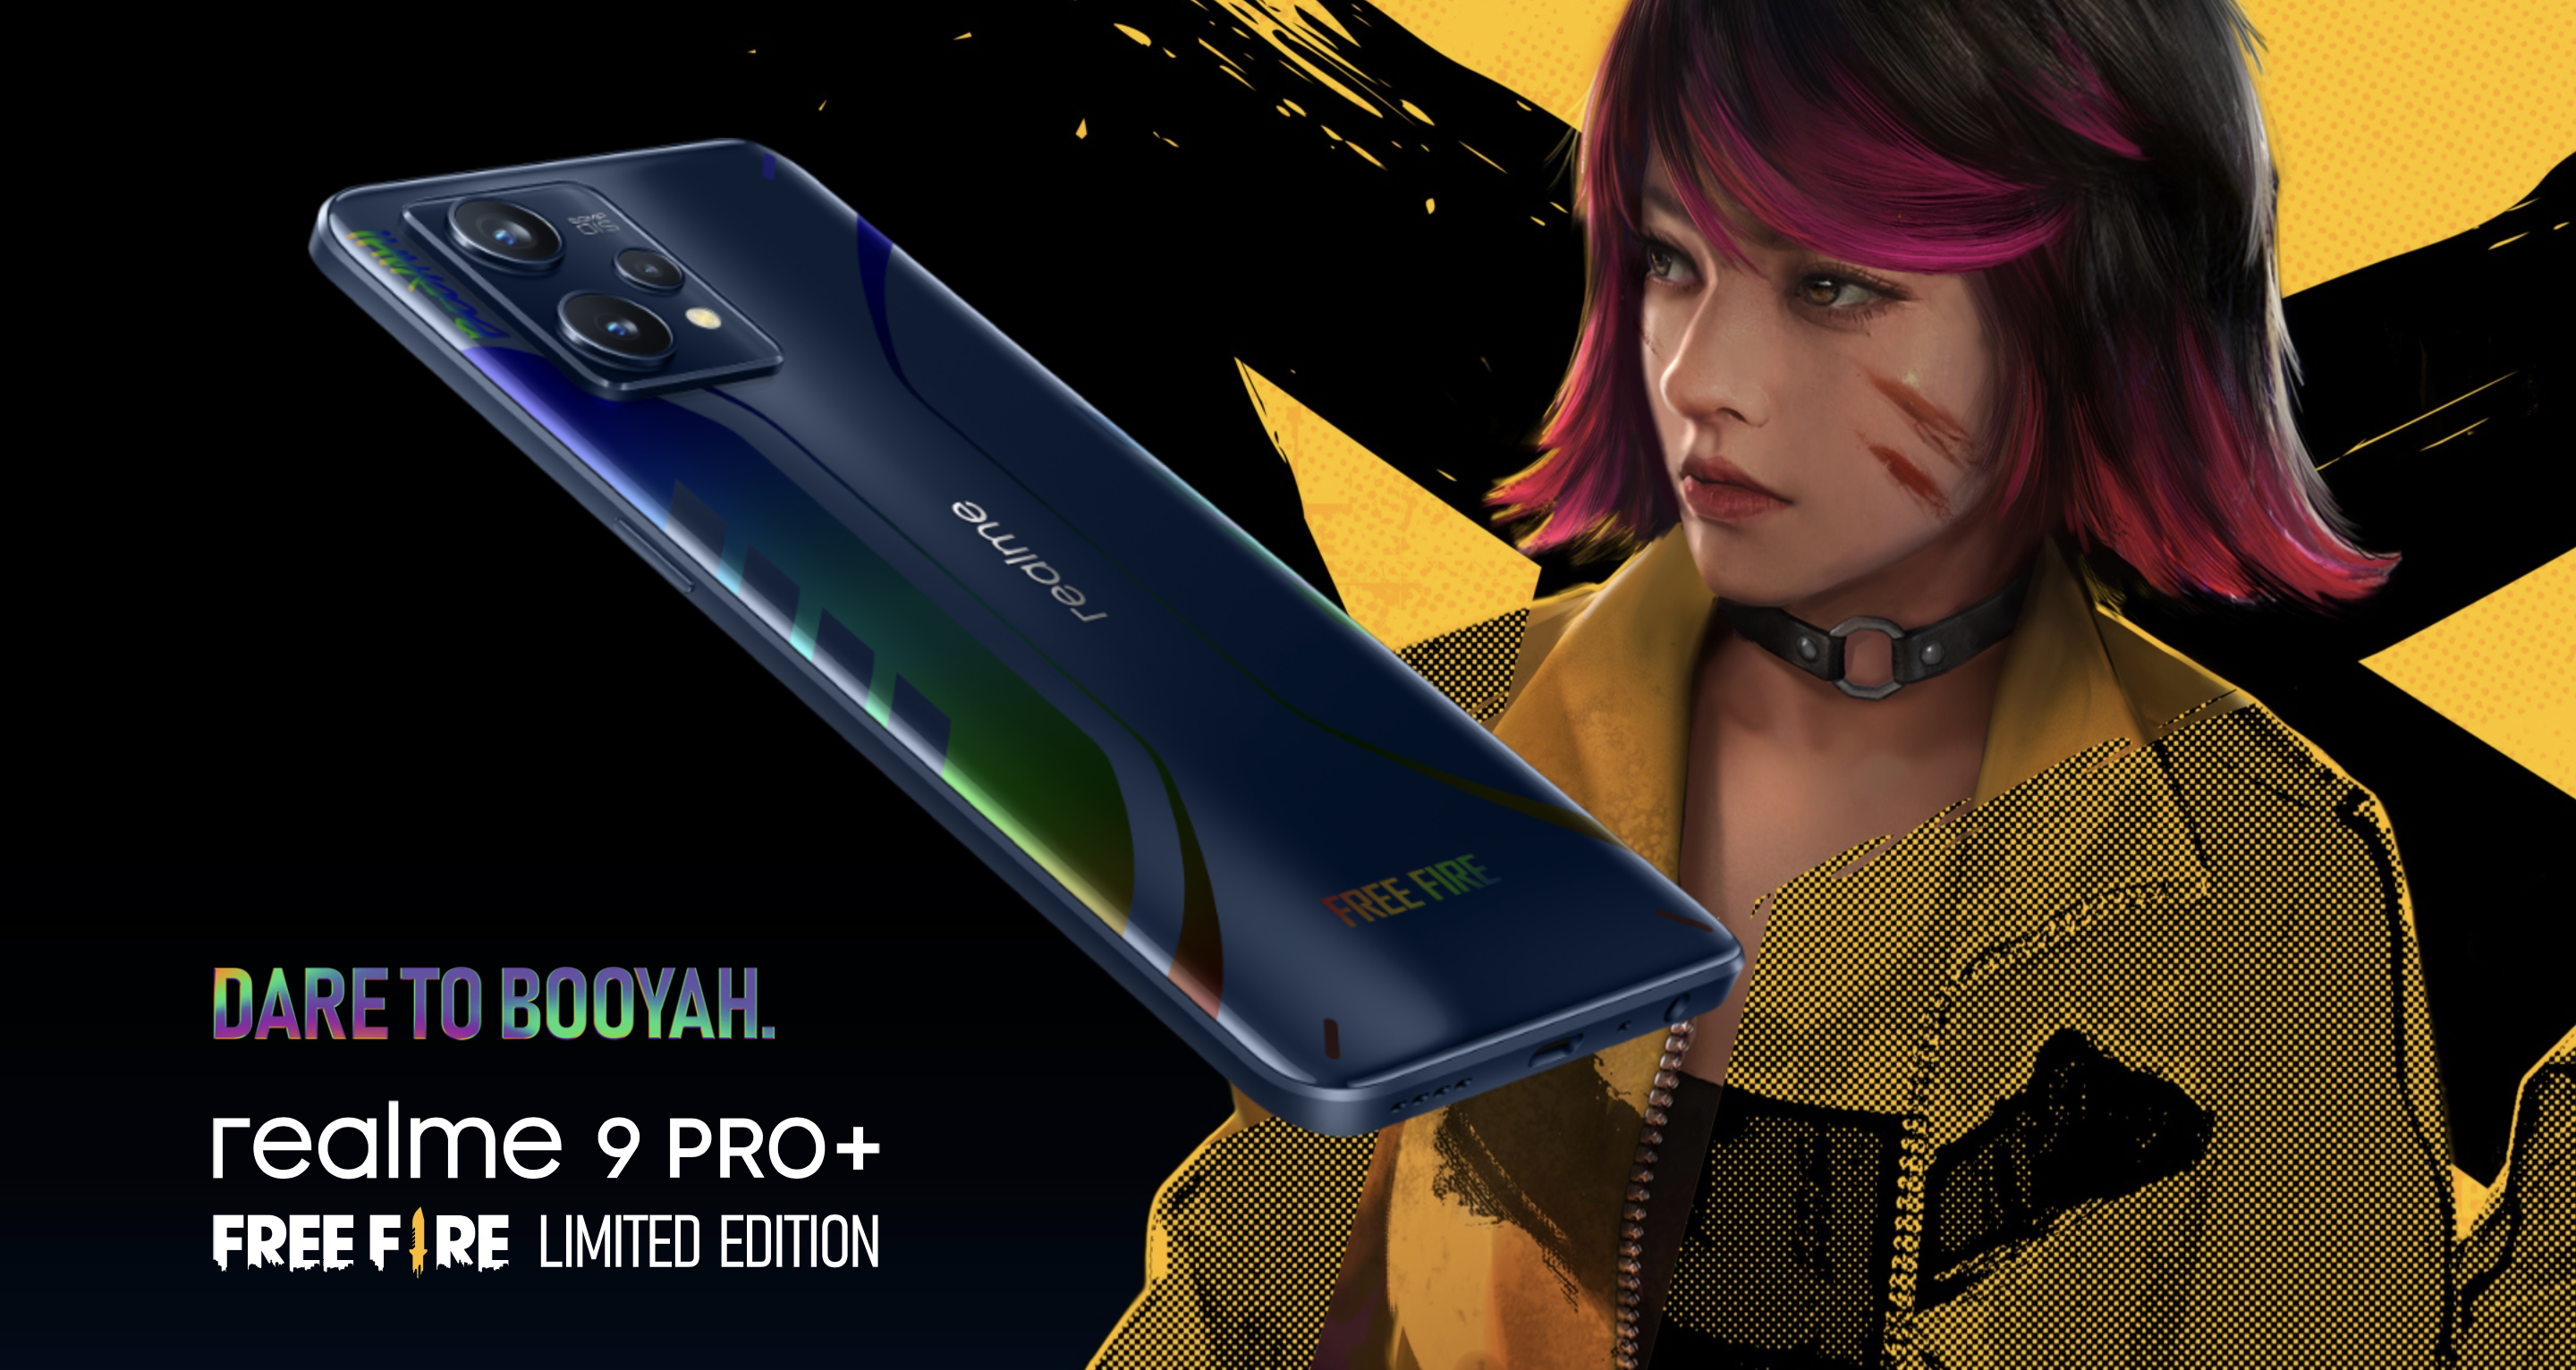 realme 9 Pro+ Free Fire Limited Edition for €419 launched in Europe